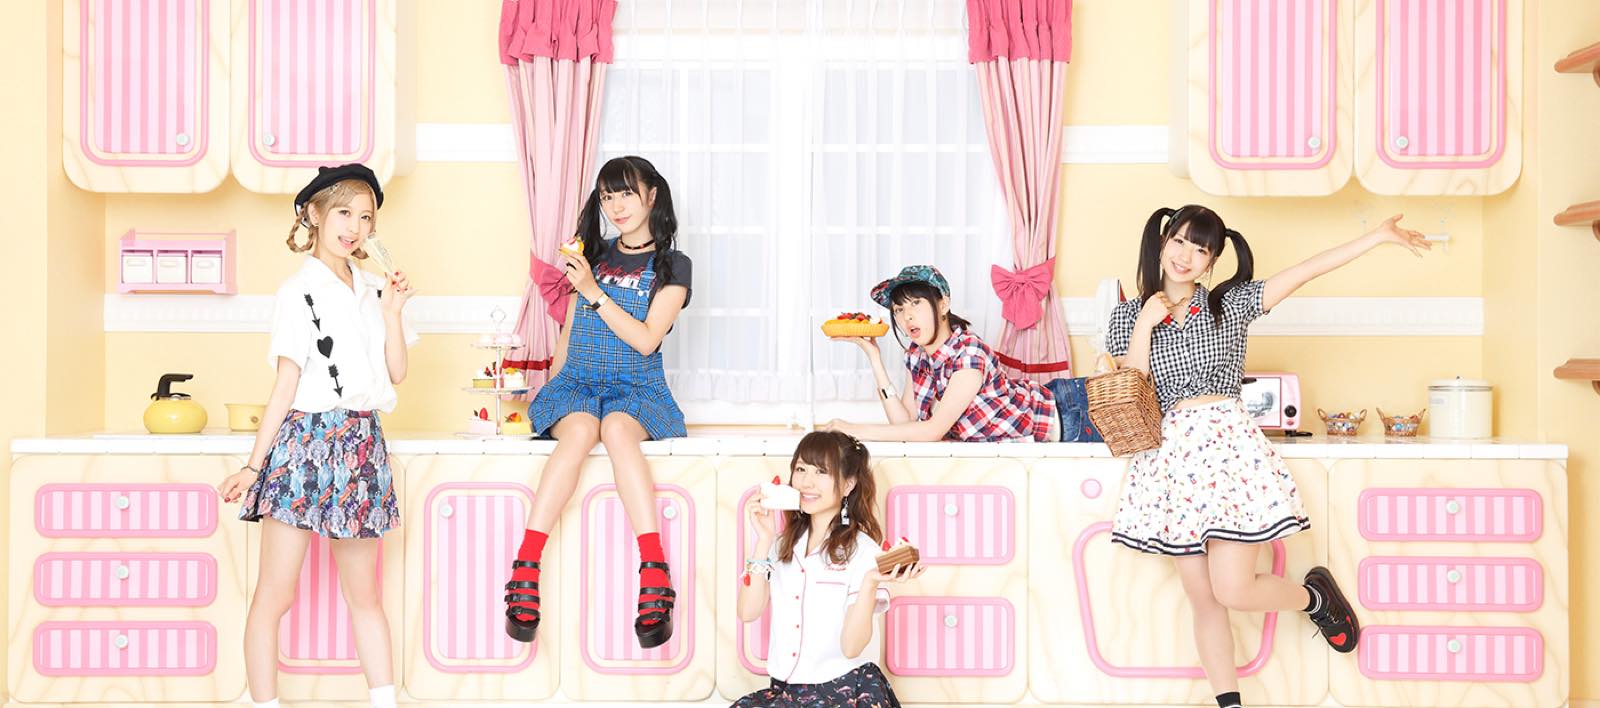 Q’ulle Release “Crossfade” Video for 1st Album “Q’ & A ～Q’ulle and Answer～”!